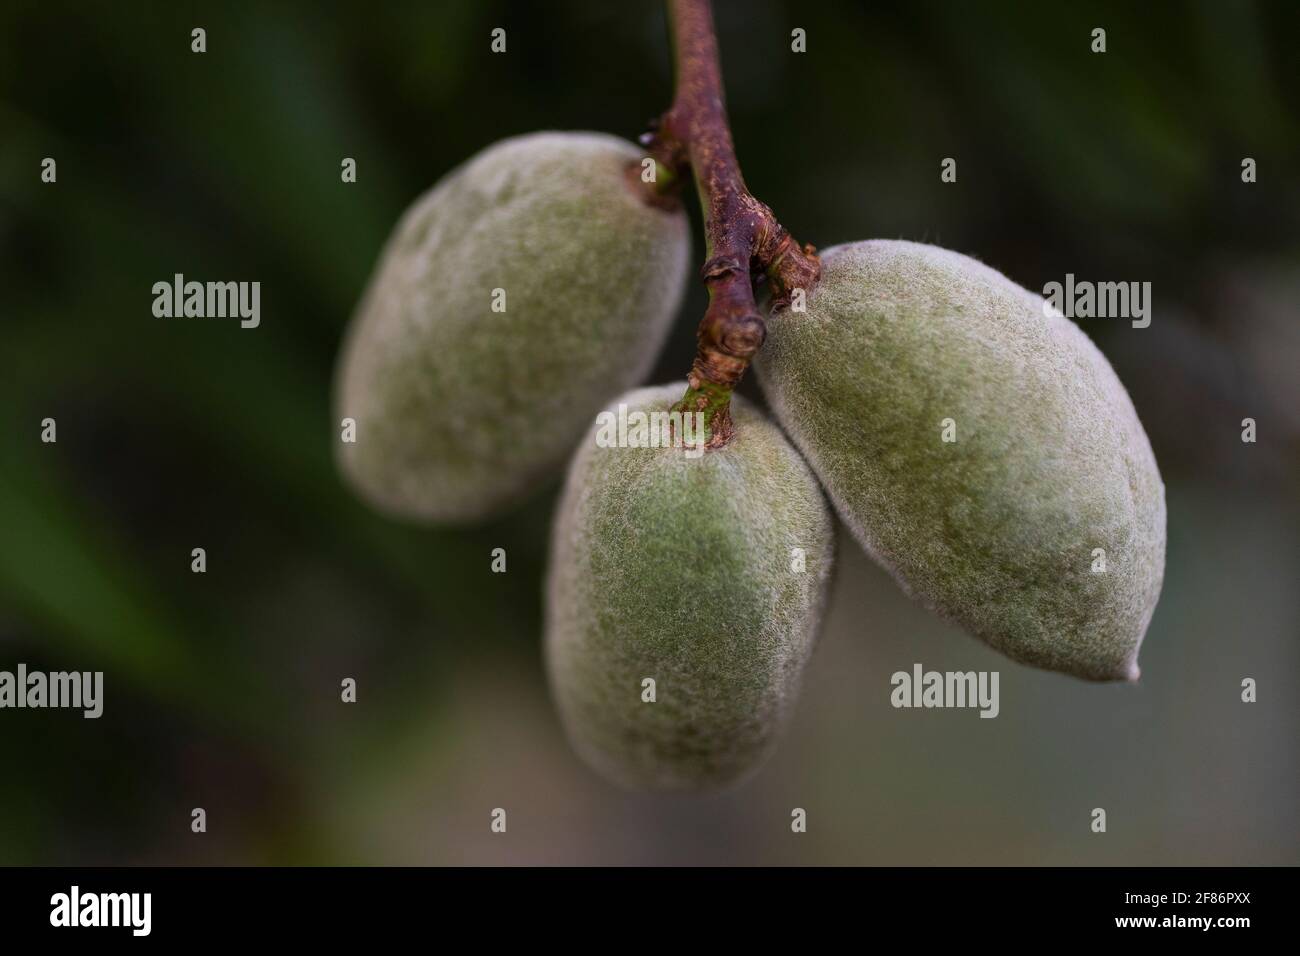 Close up almonds growing on branch Stock Photo